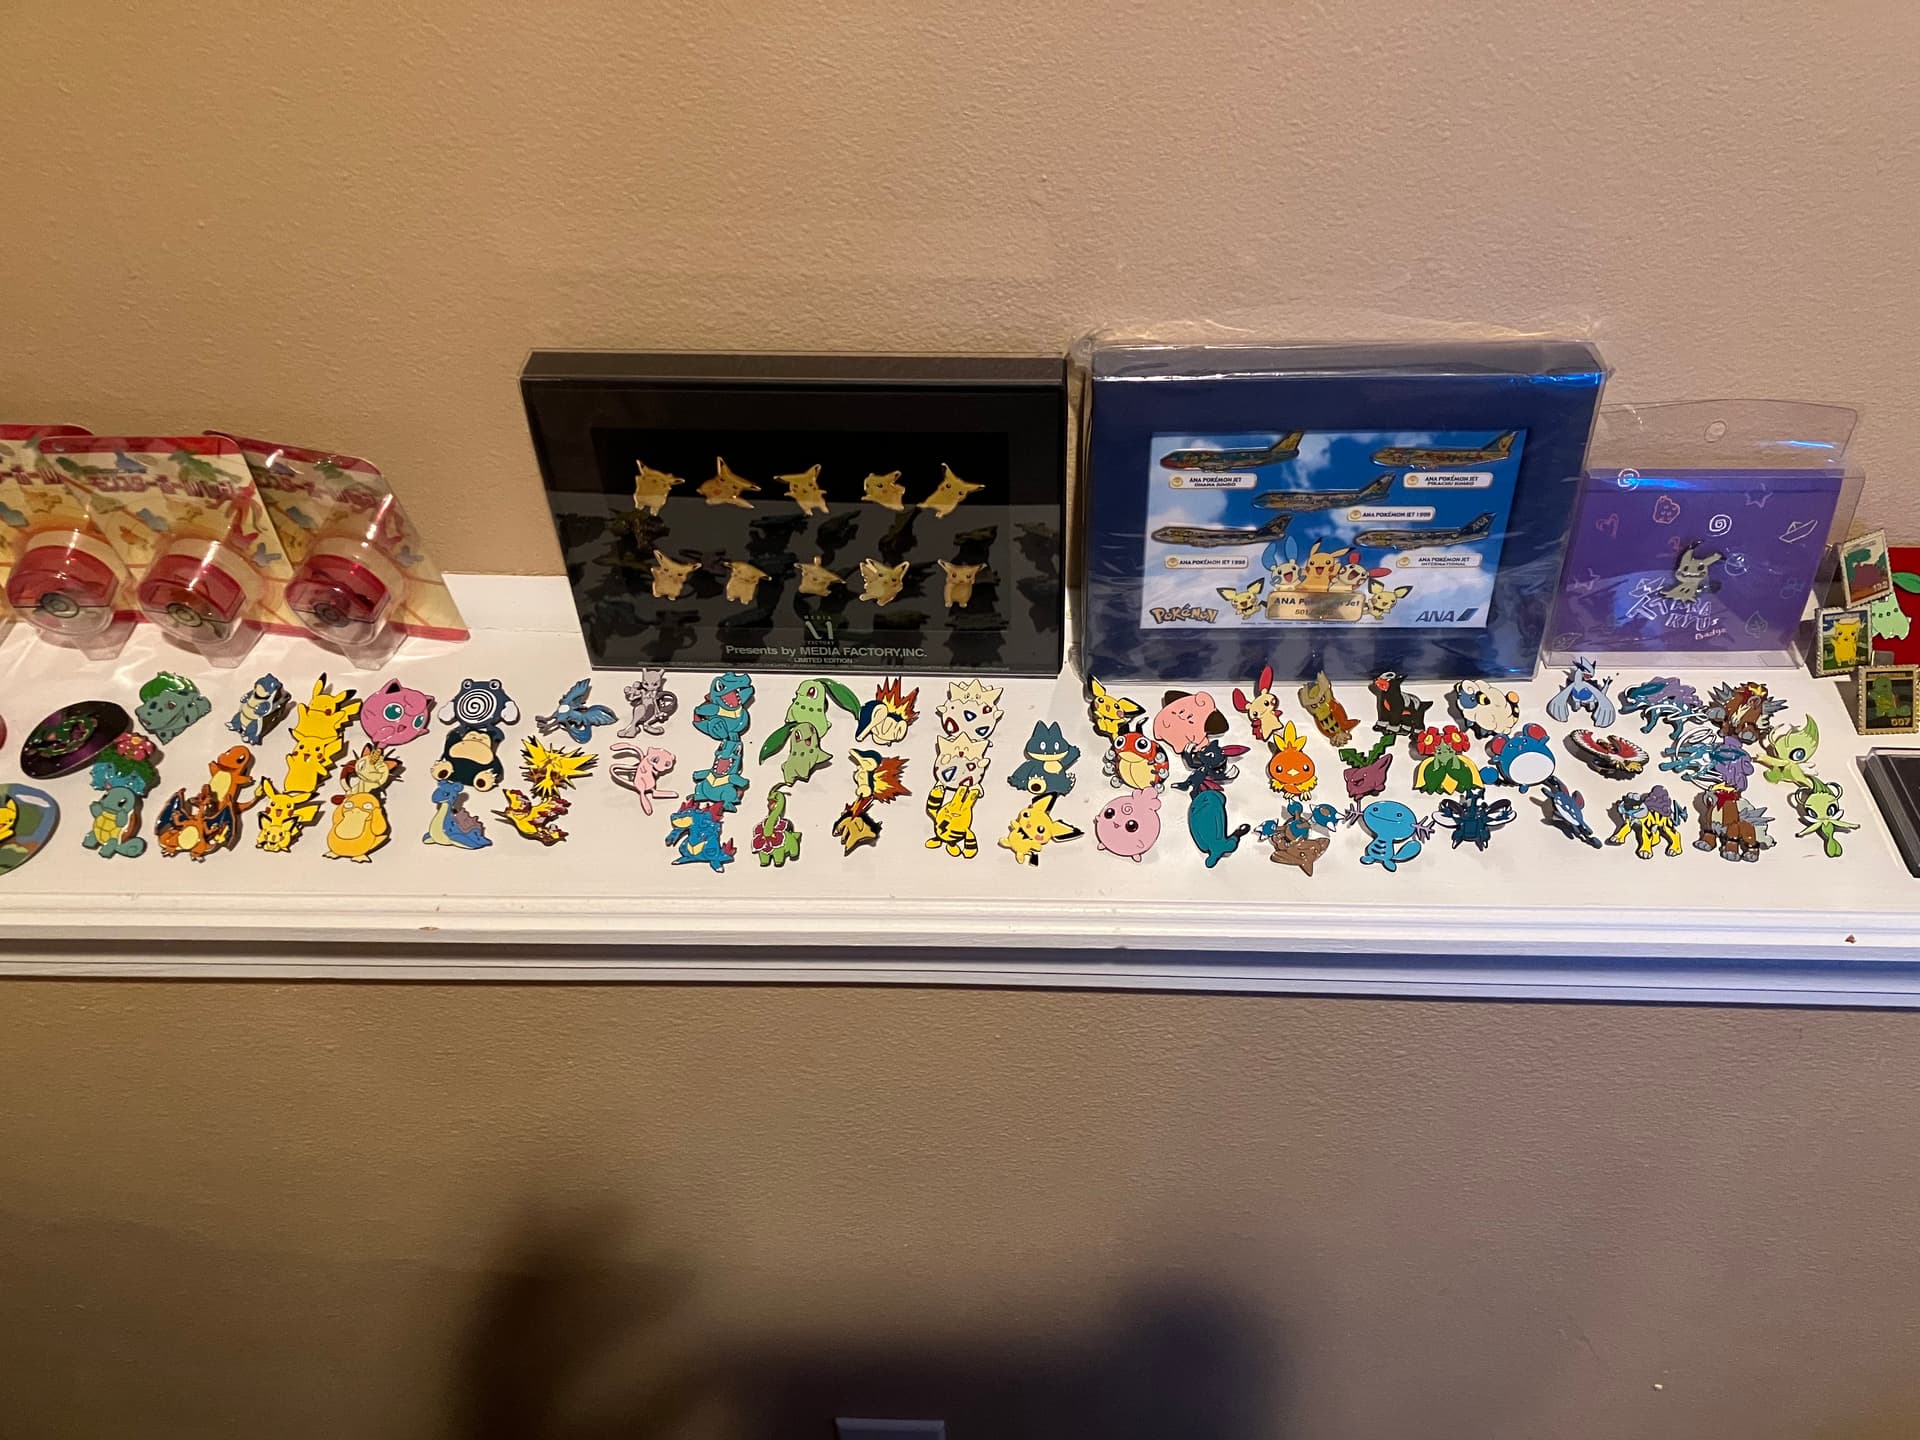 theFierceStorm's Officially Licensed Pokémon Pin Collection